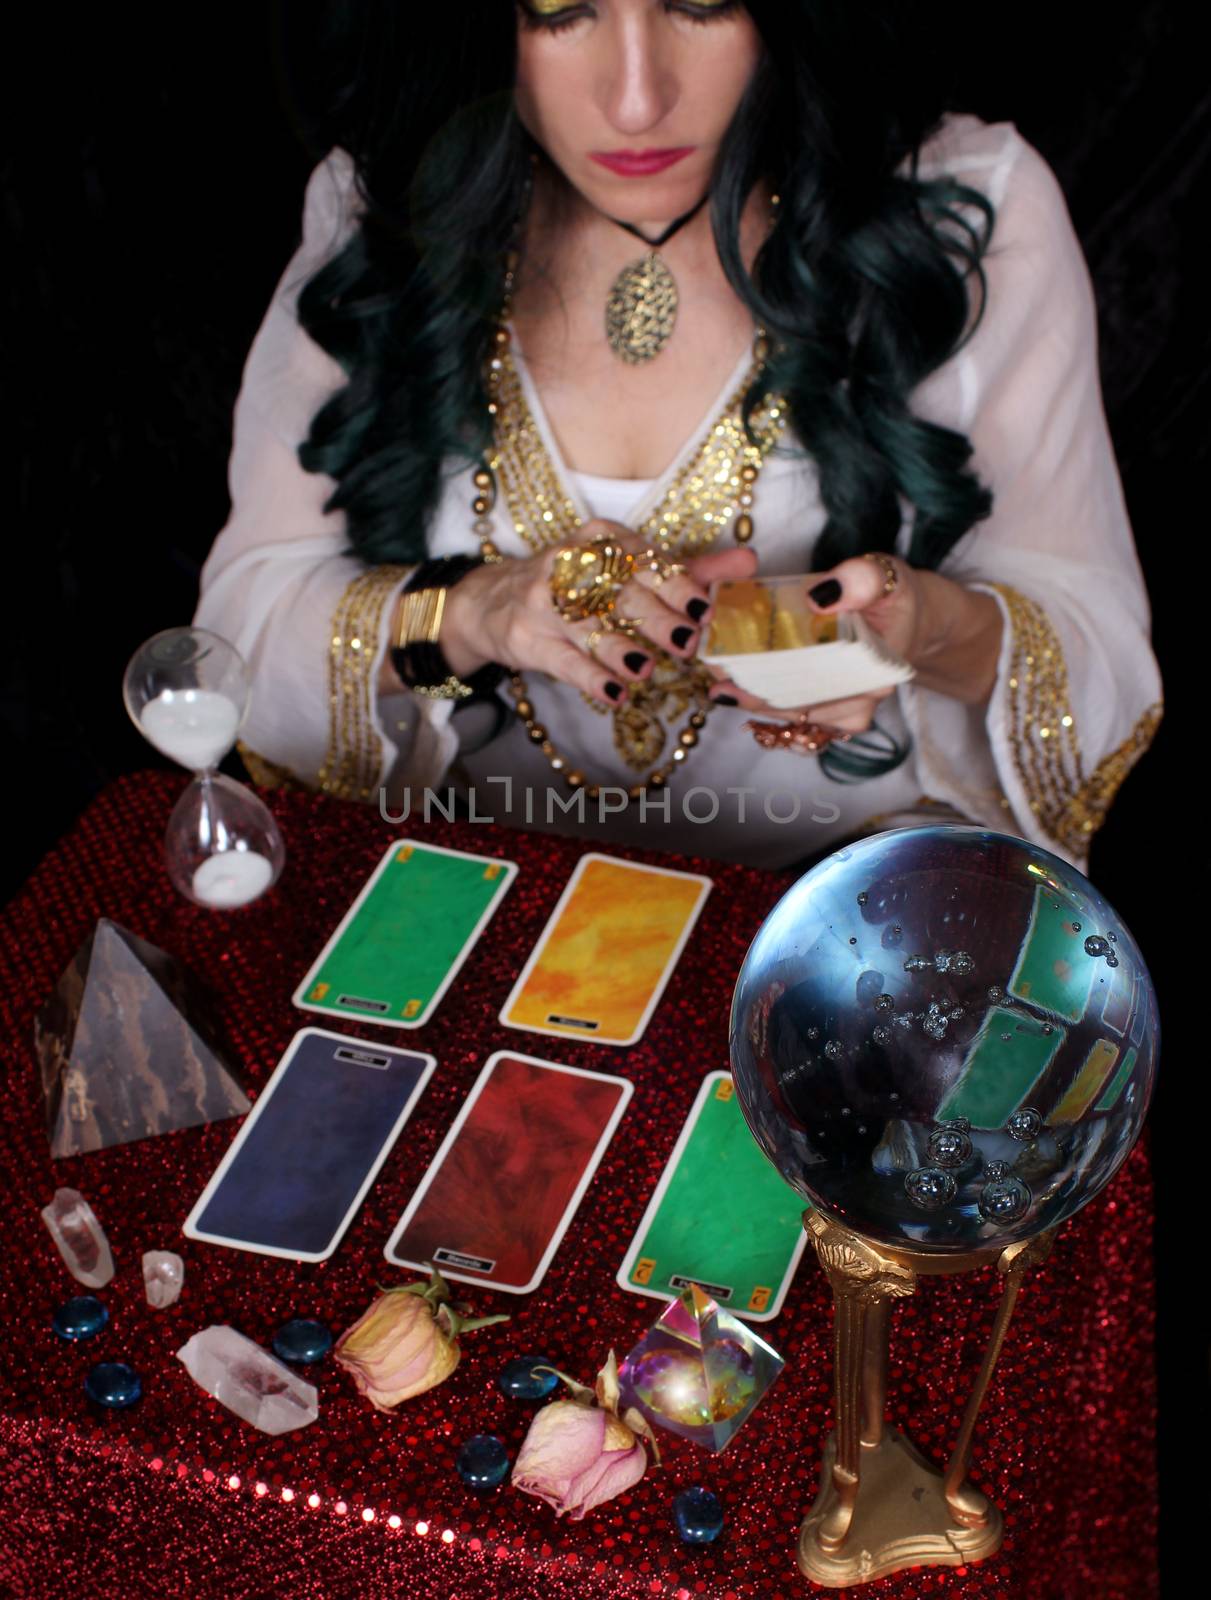 Psychic with crystal ball and tarot cards by Marti157900